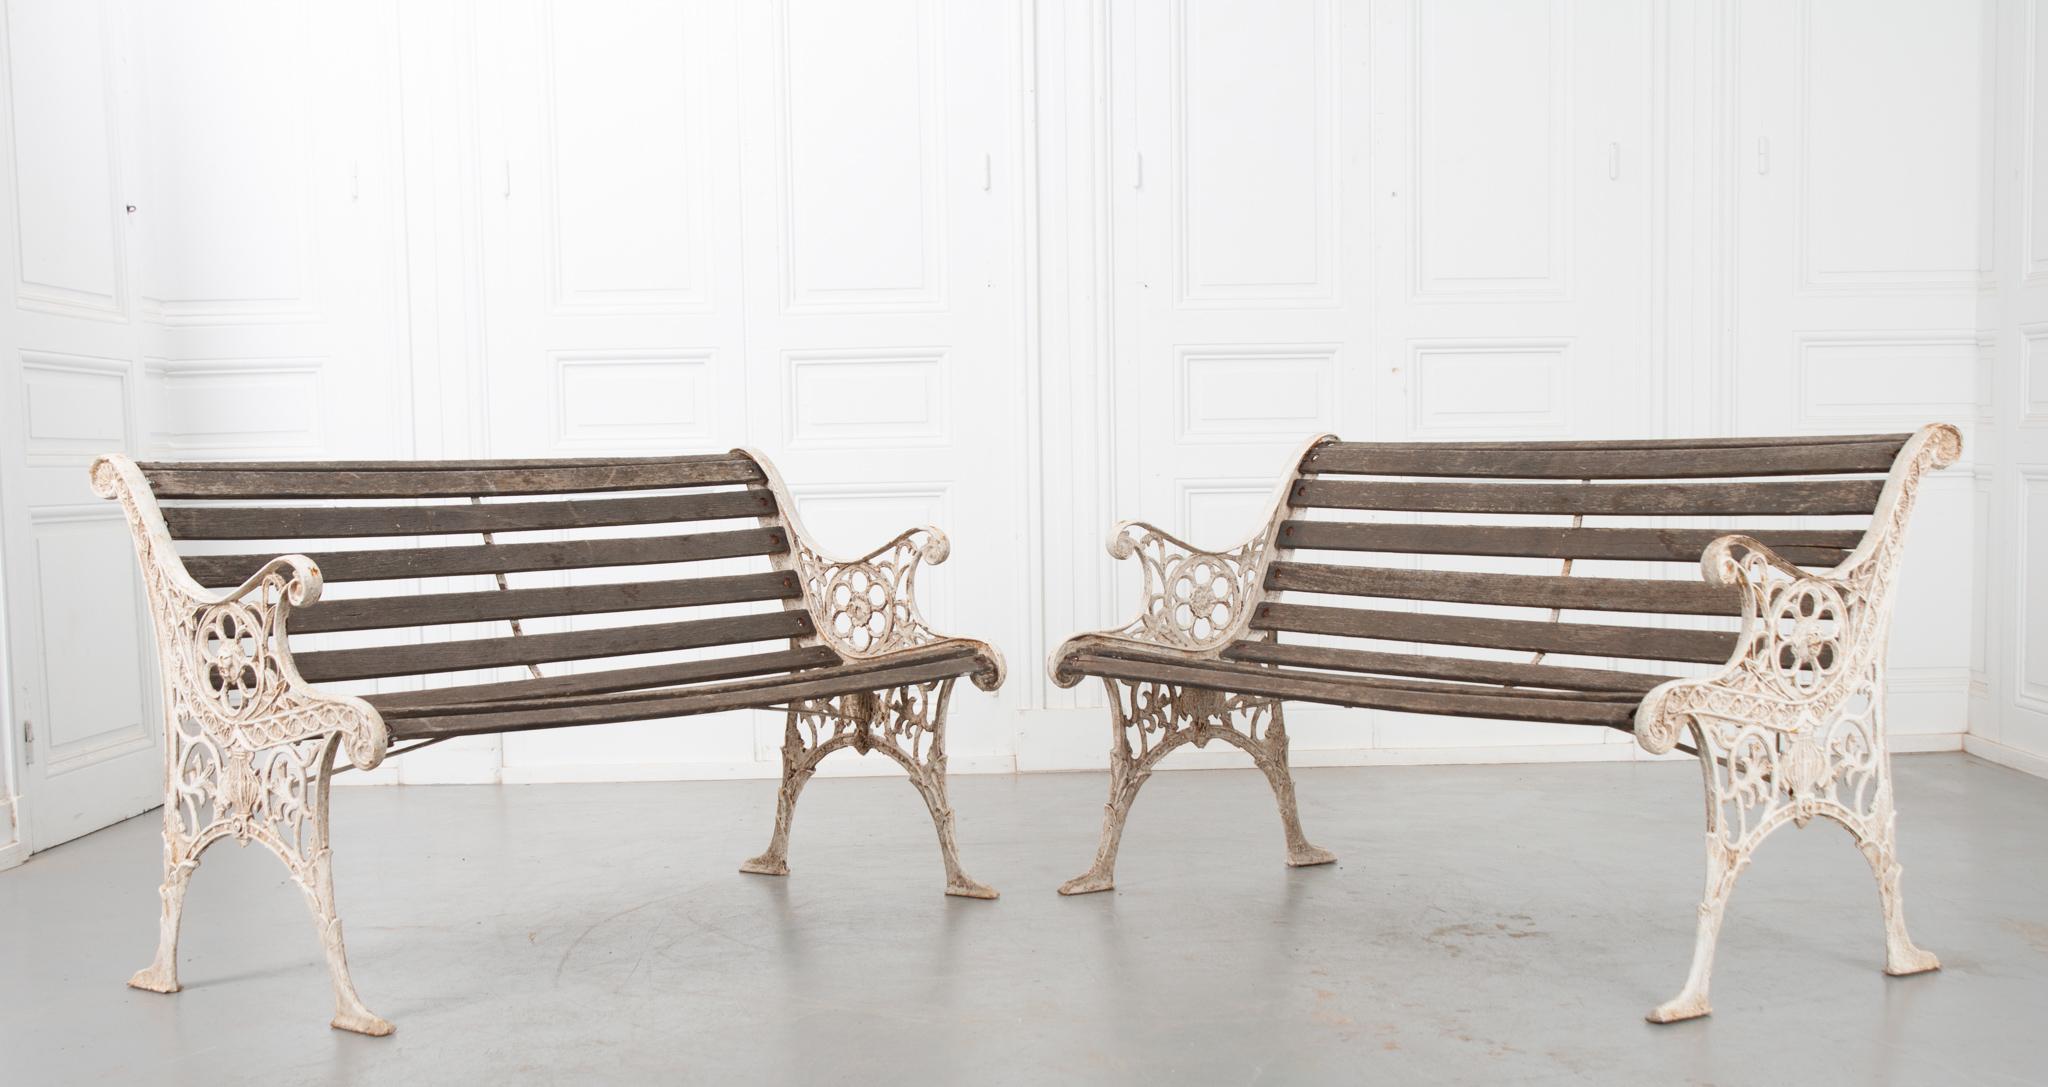 This stunning pair of white painted cast iron benches showcase pierced decorative scroll designs; featuring stars, the face of a lion on the armrest, and a hot air balloon among the leafy motif. The pale worn wood slats create a comfortable seat for